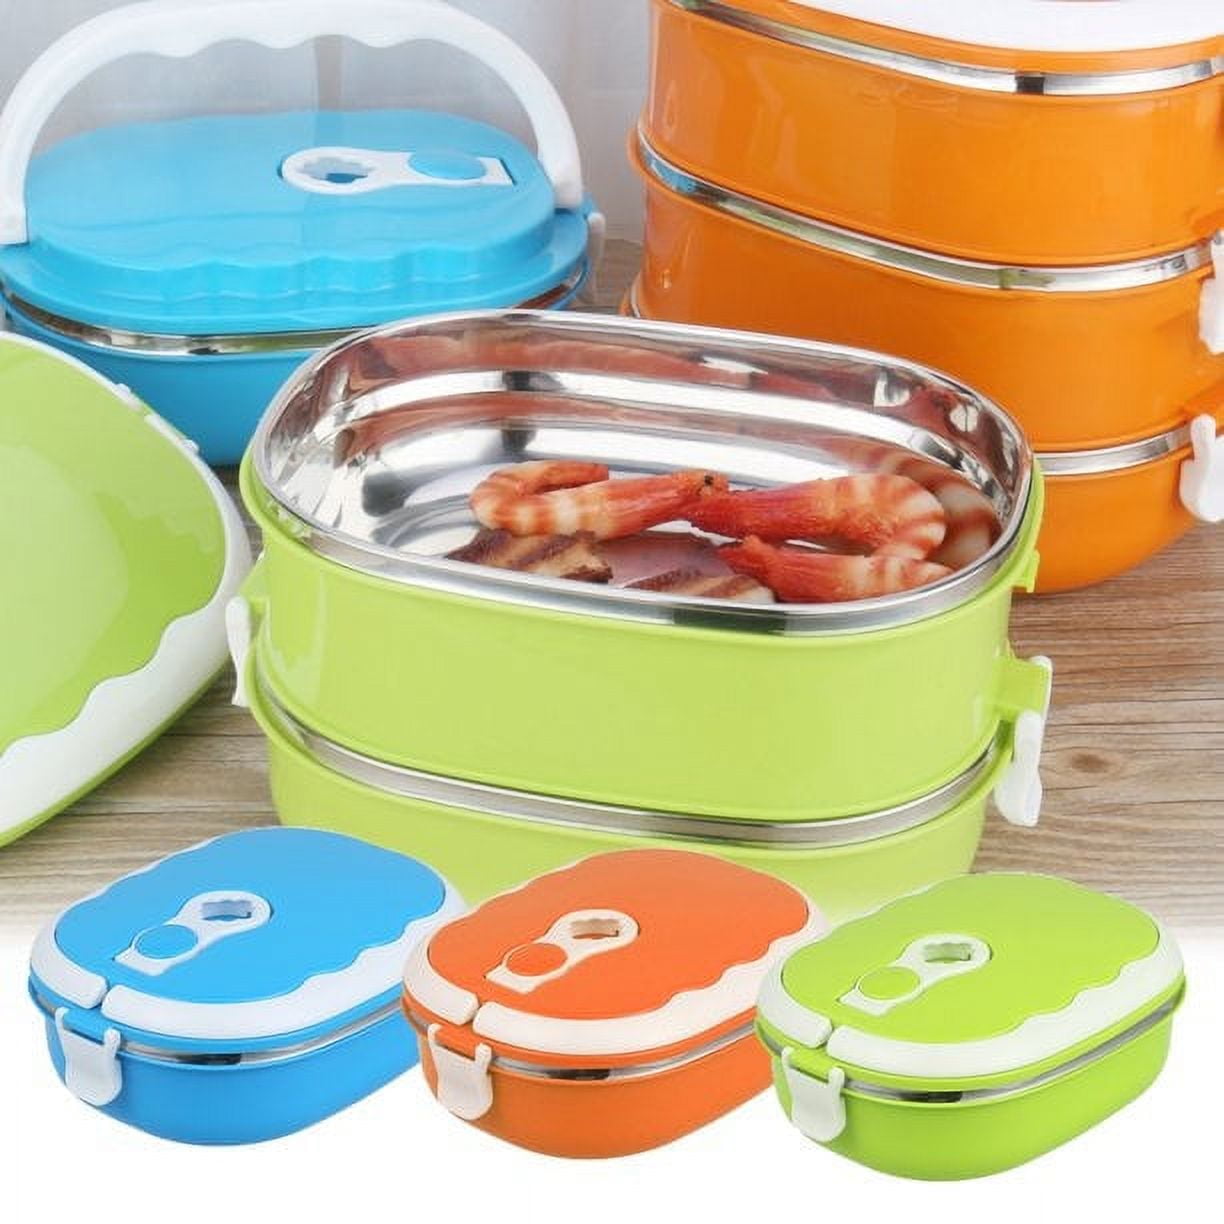 Portable Food Warmer School Student Lunch Box Heat Preservation Container, Size: 20